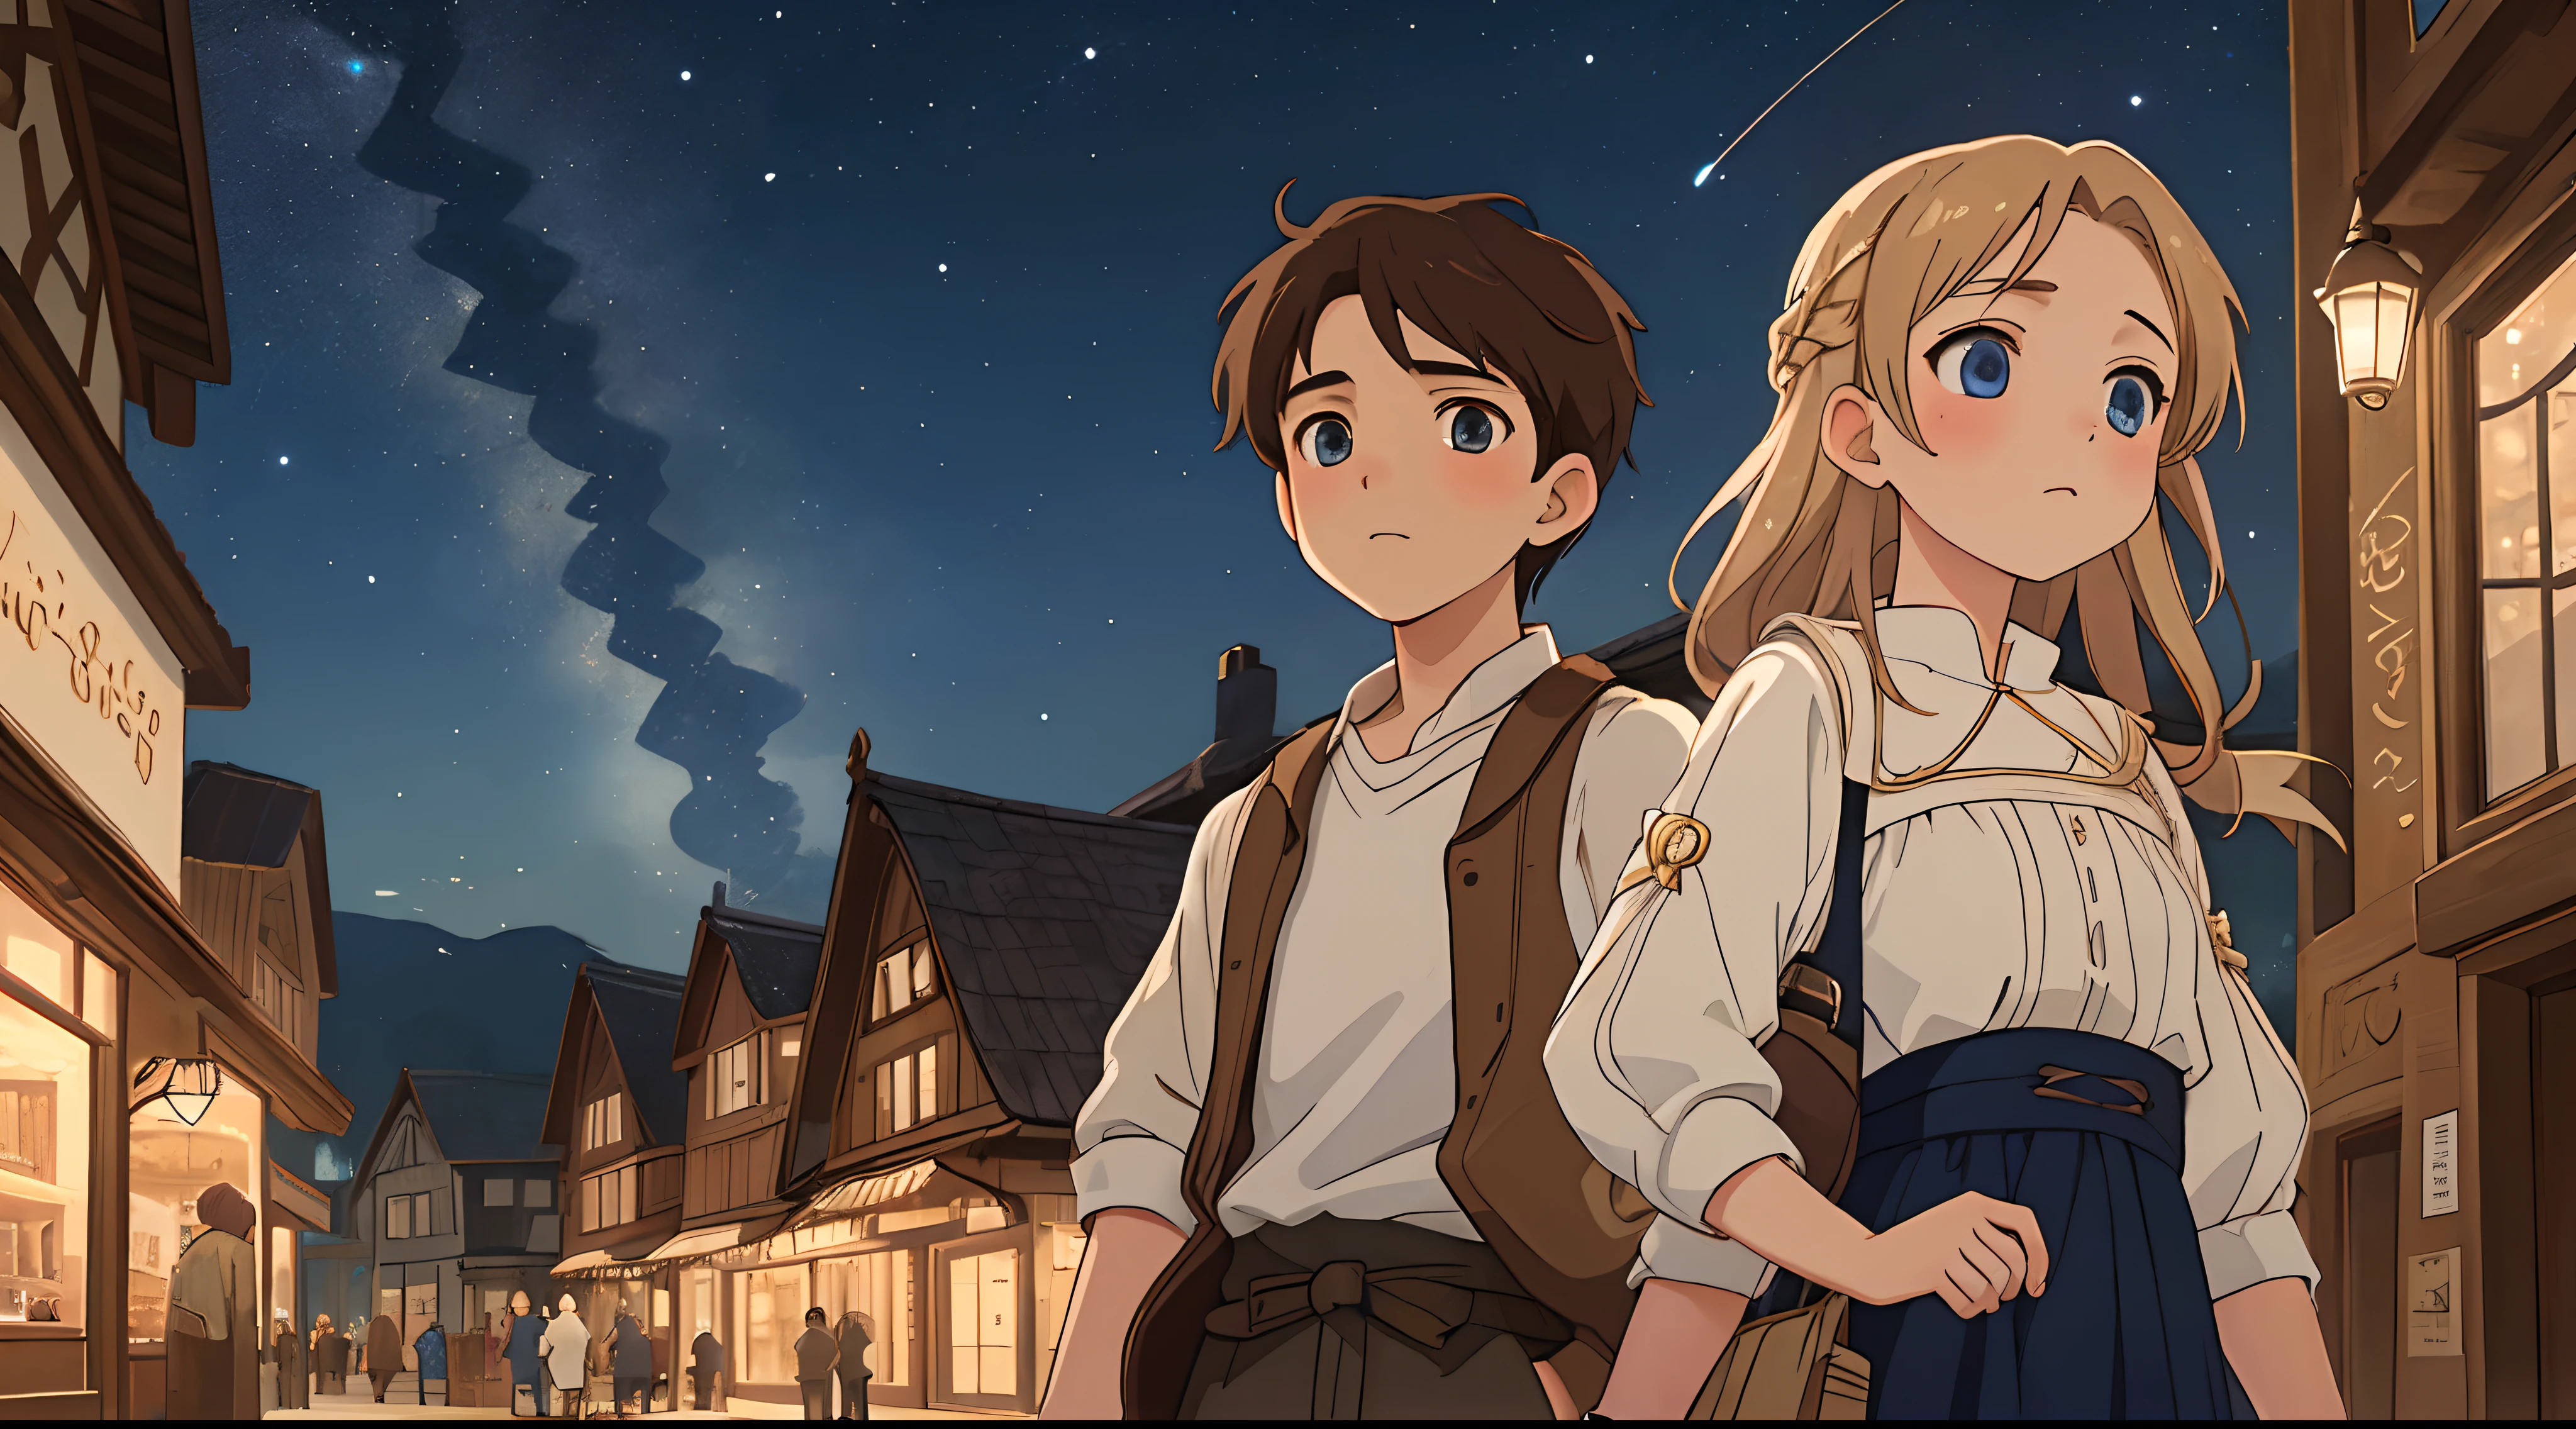 (Best quality:1.2), (masterpiece:1.2), (highly detailed:1.3), 1boy,1girl, 1 younger peasant boy, brown hair, brown eyes, sad and 1 younger peasant girl, blonde, blue eyes , outside a store, Starry sky, Sparse light, Night, anime